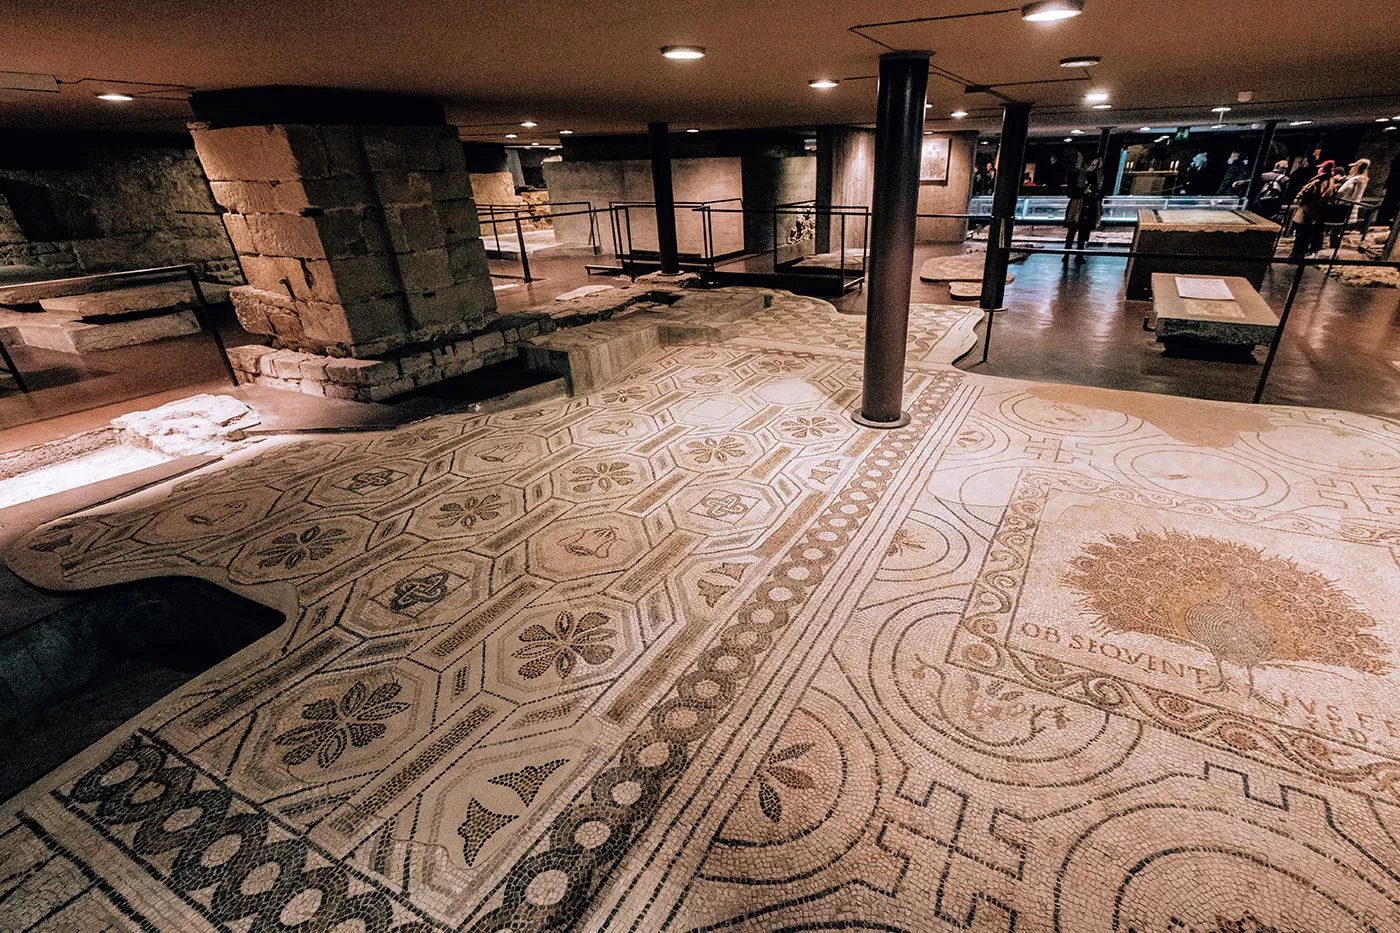 Best things to do in Florence - Santa Maria del Fiore Cathedral - Santa Reparata Crypt - Mosaic floor